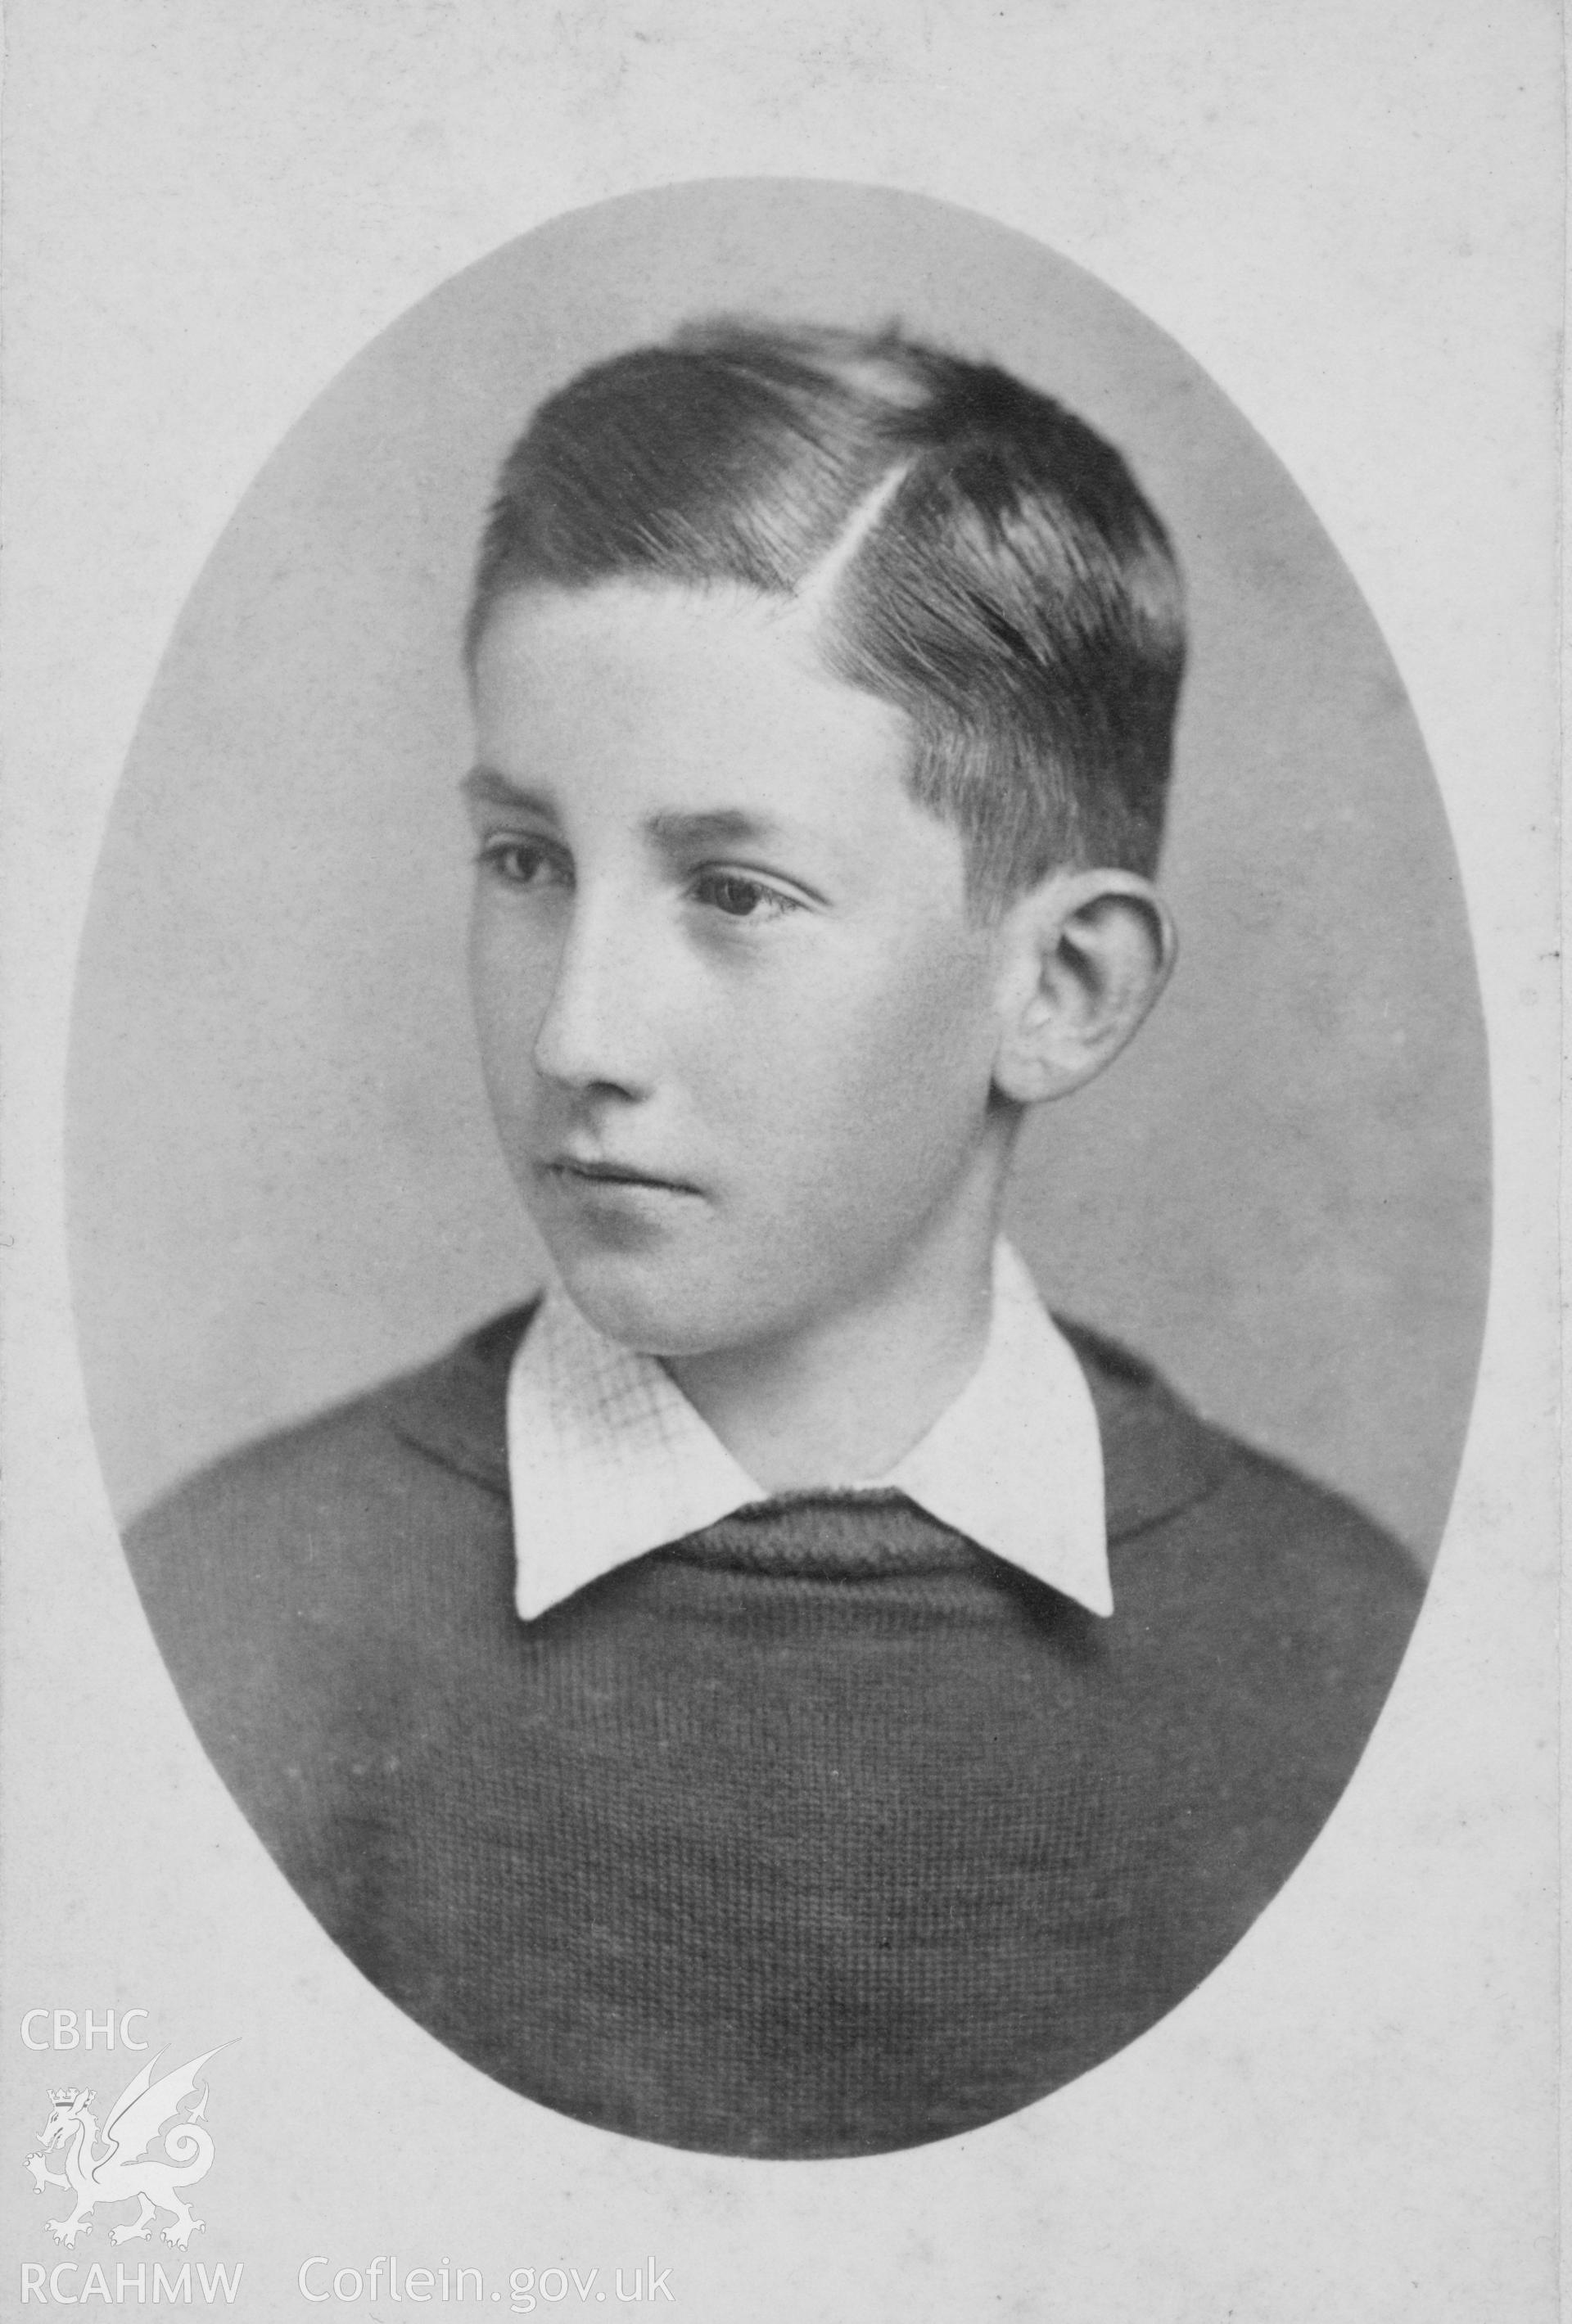 Photographic portrait of Herbert North as a child.